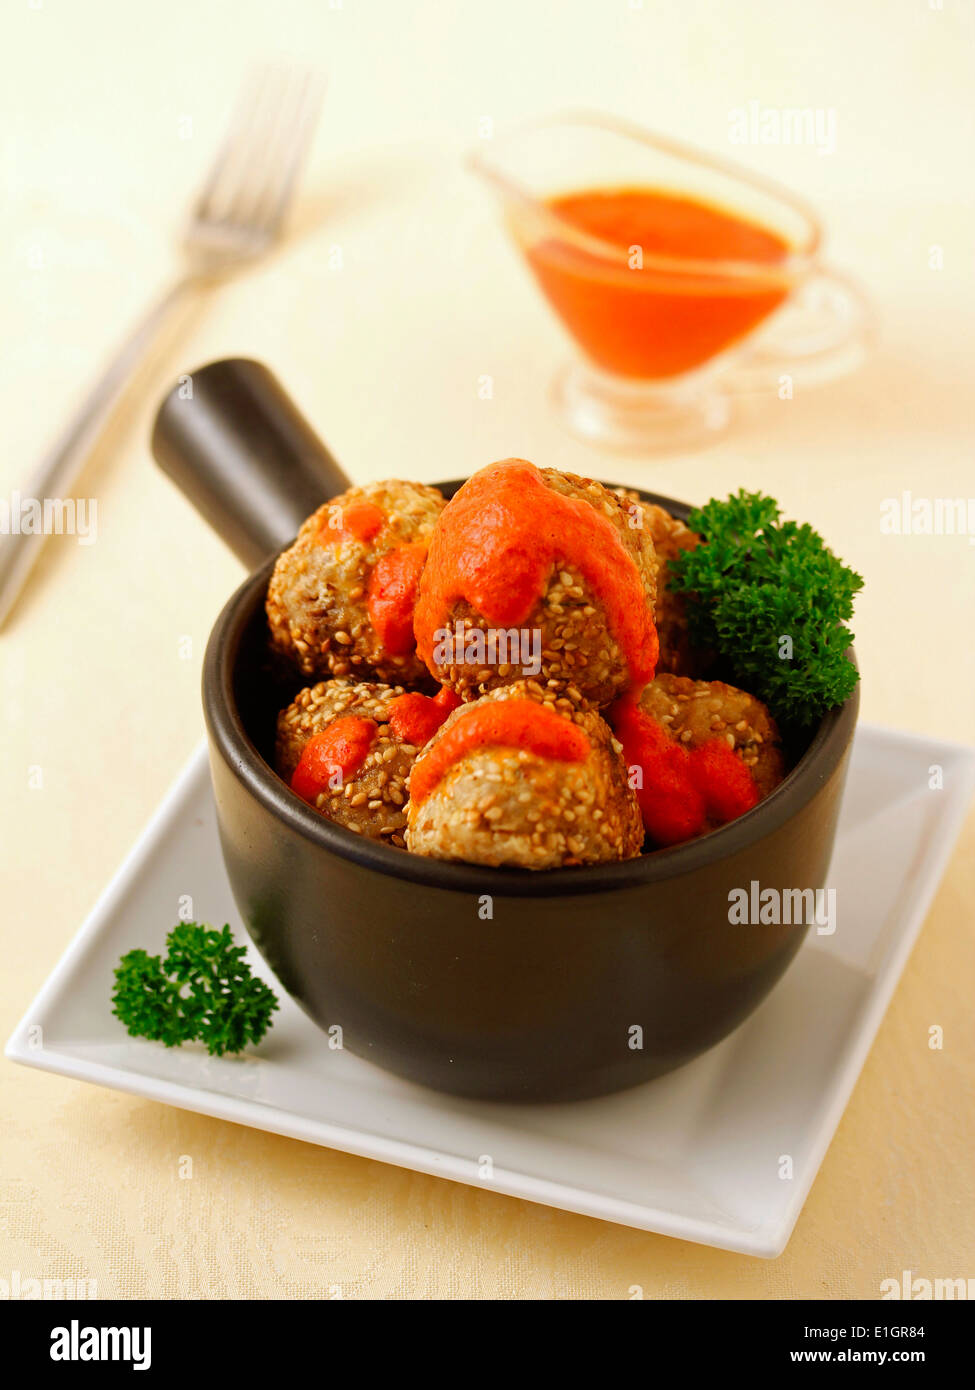 Quinoa meatballs with cheese and mushrooms. Recipe available. Stock Photo